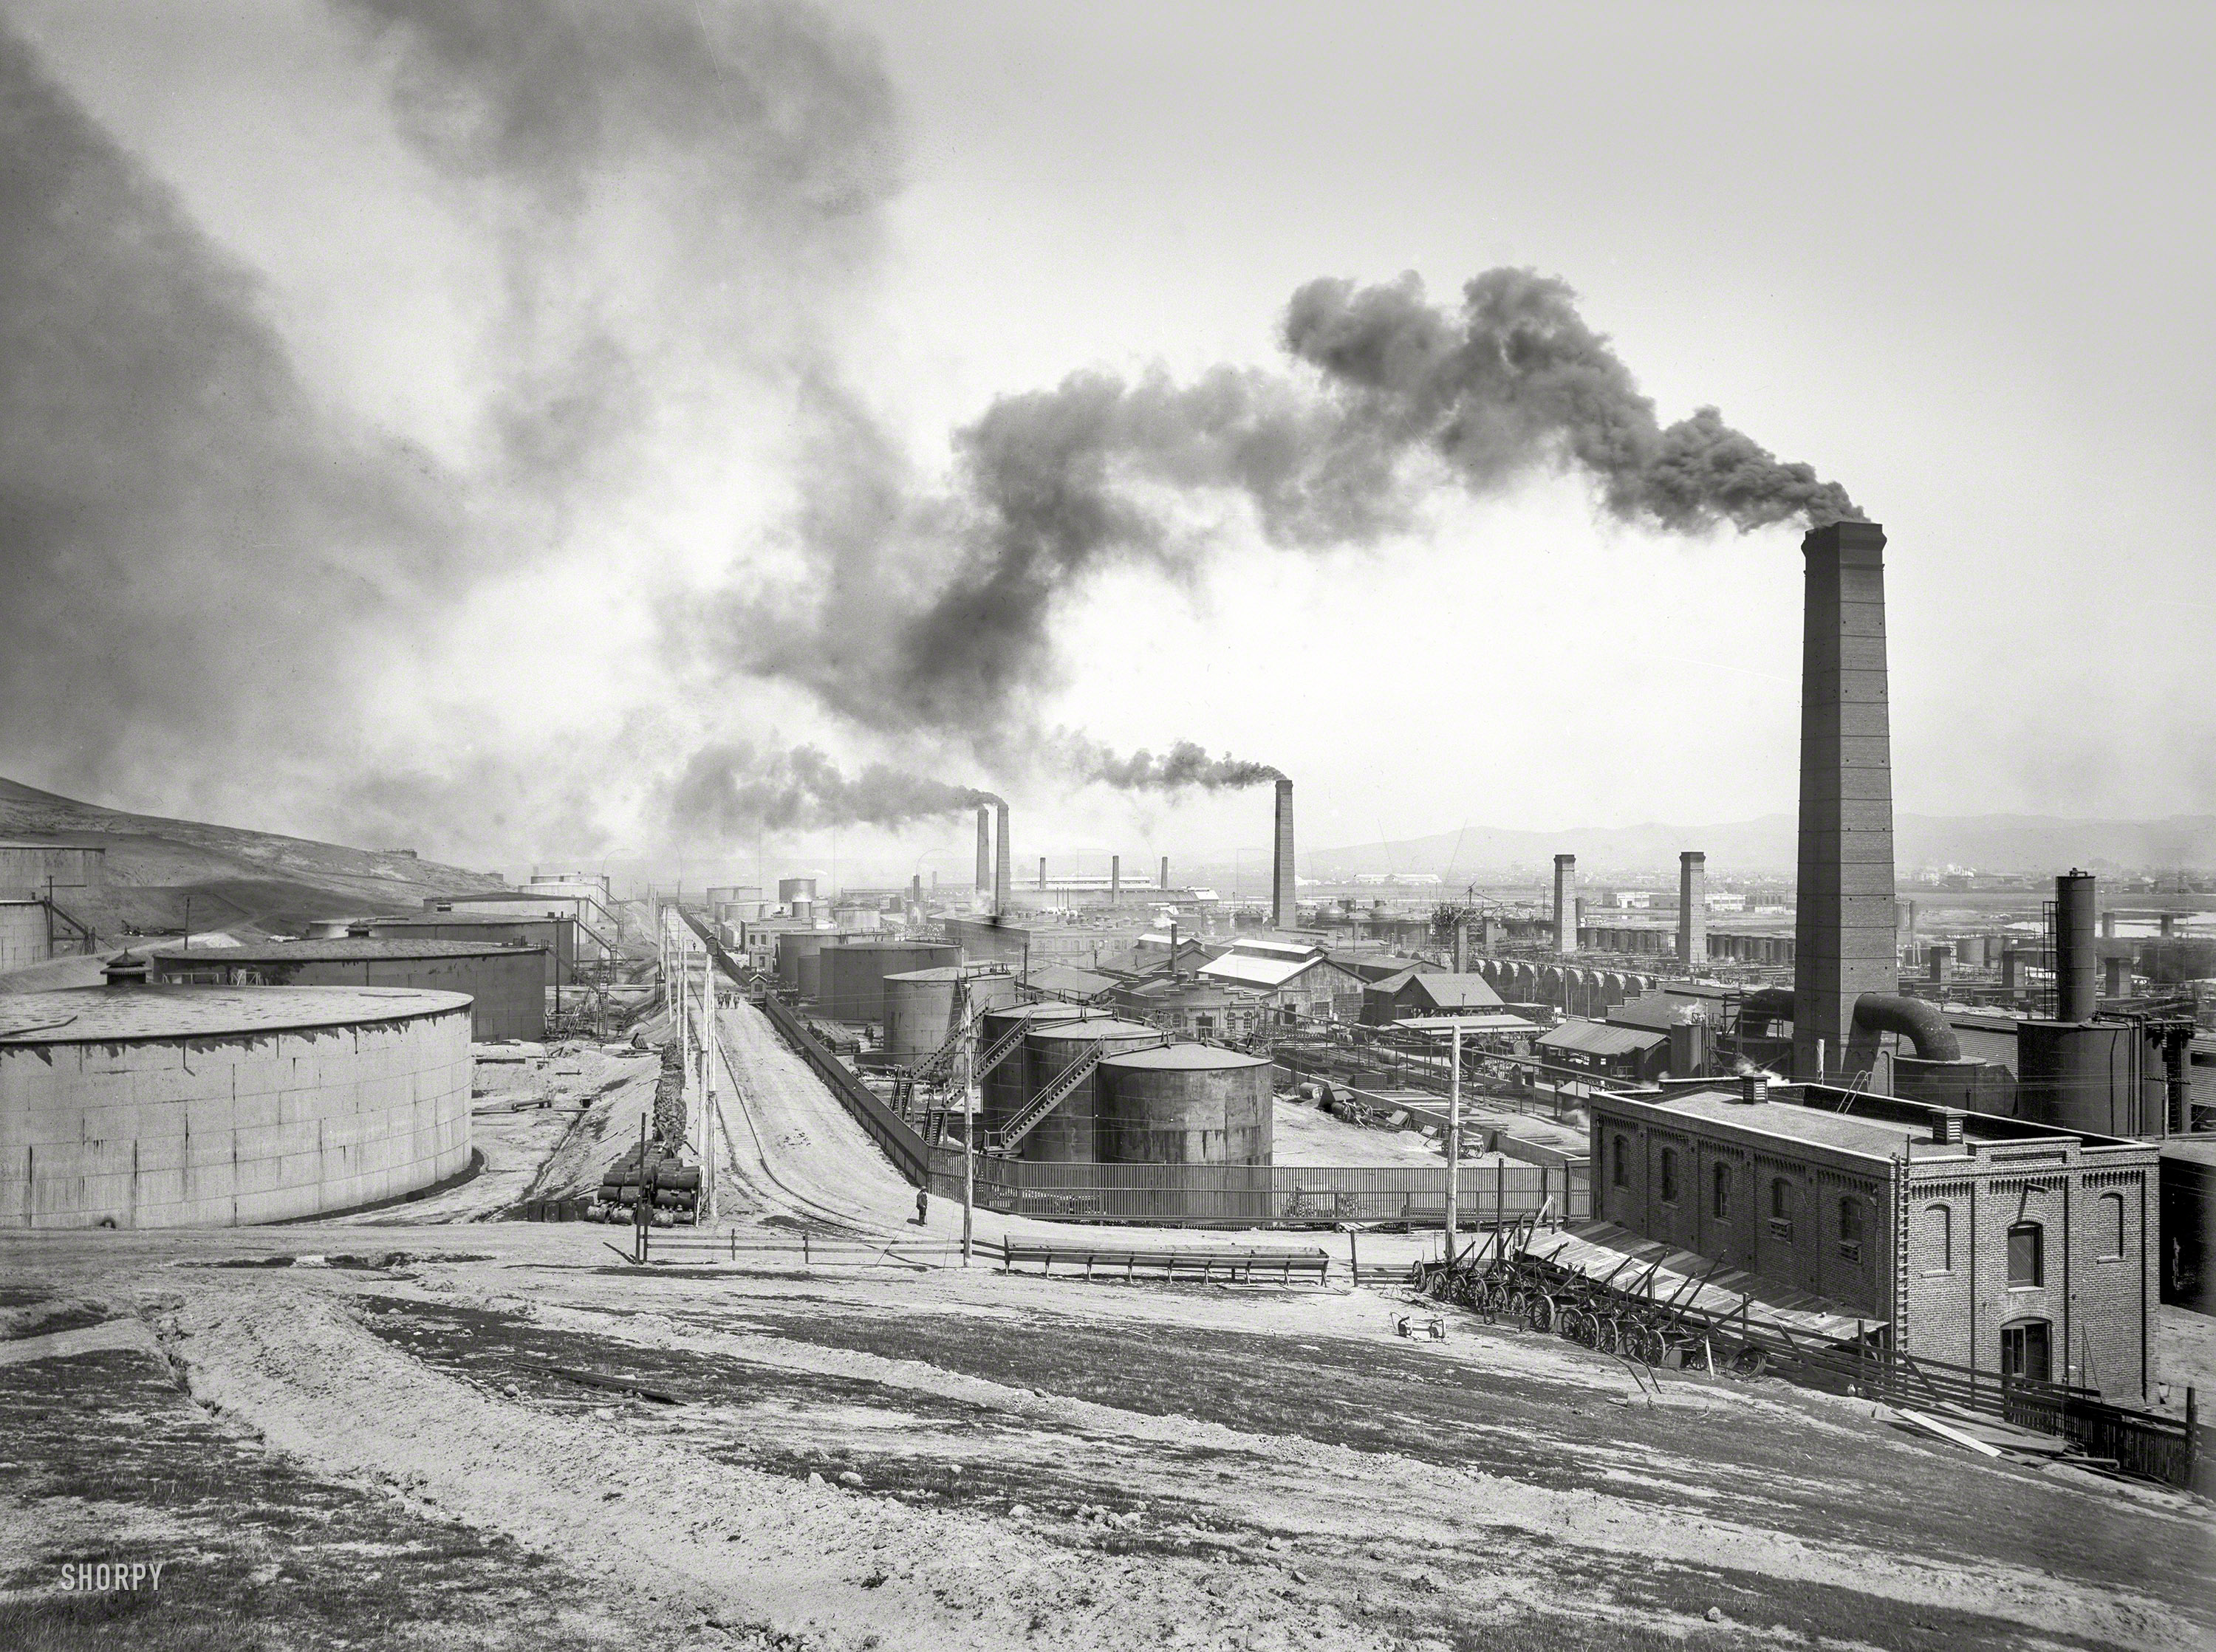 Contra Costa County, California, circa 1910. "Standard Oil works, Richmond, looking east." The refinery, described as "colossal" when it opened in 1902, is still in operation, under the Chevron name. 8x6 inch glass negative. View full size.